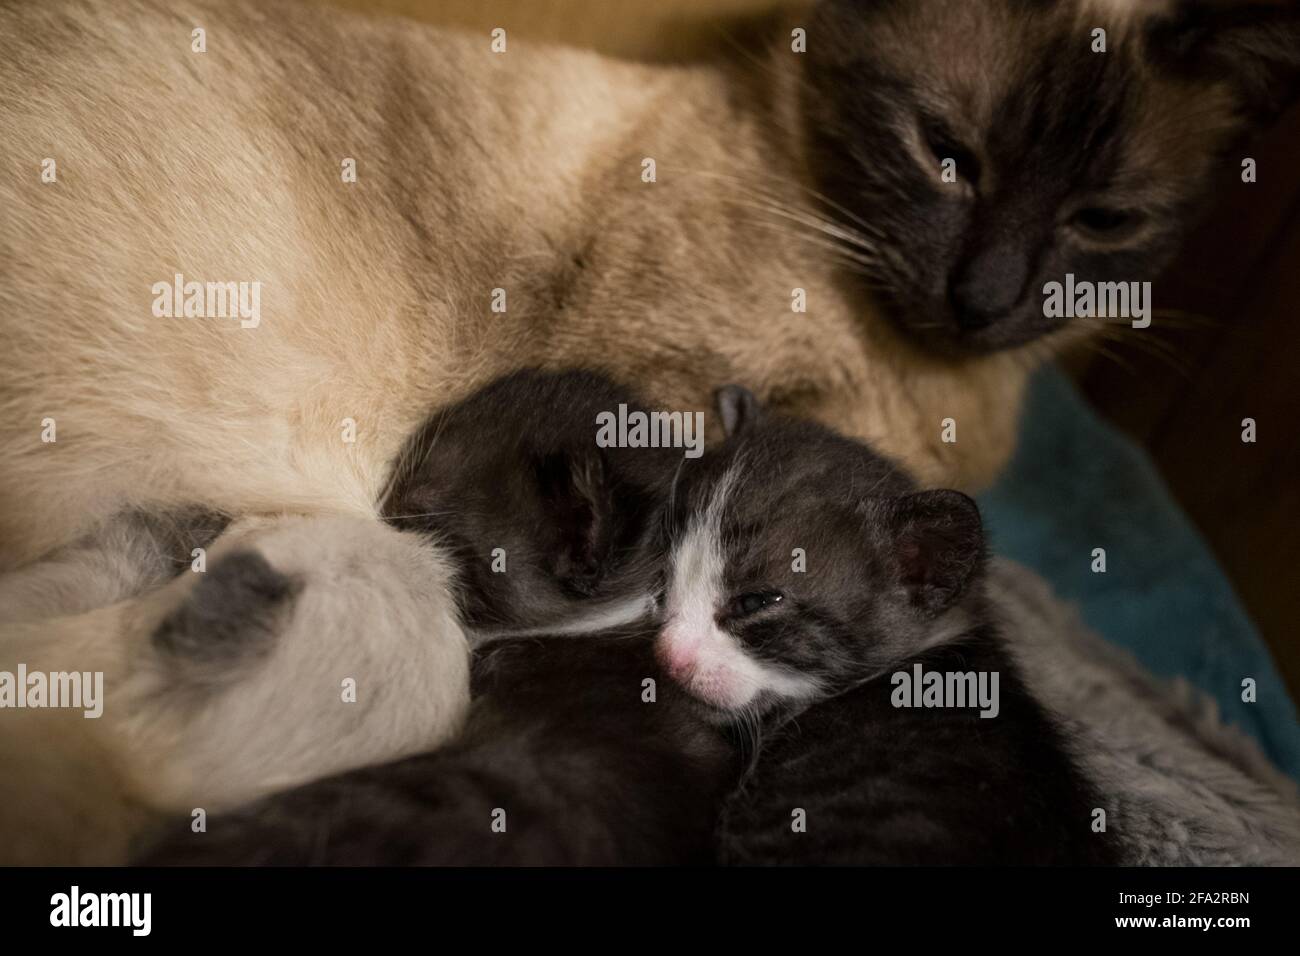 A mother cat sleeping with her kittens in a cardboard box Stock Photo